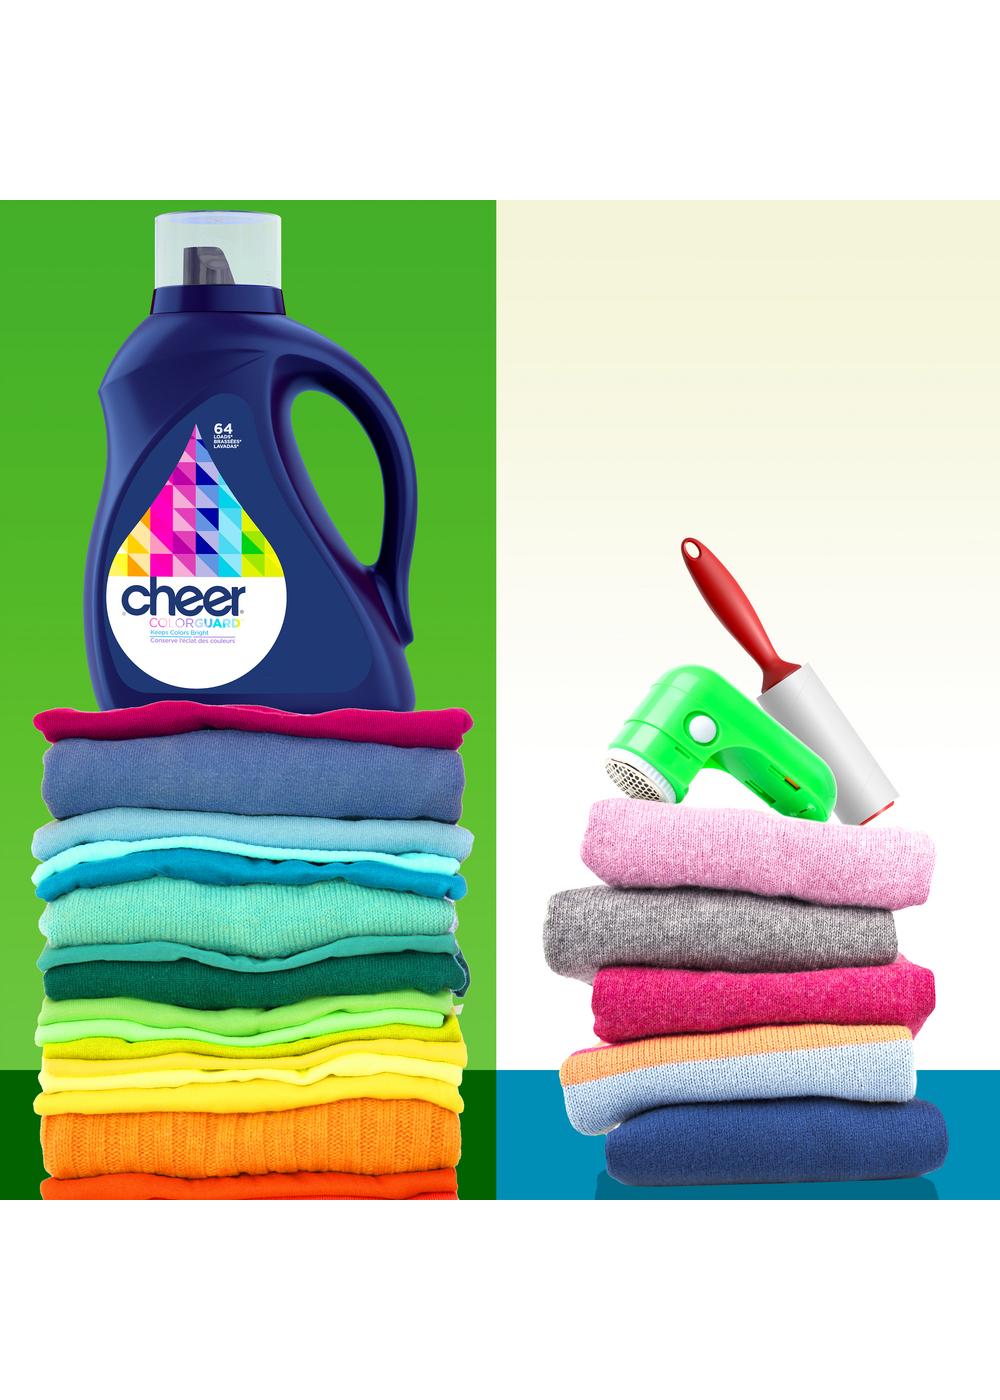 Shout Color Catcher Dye-Trapping Sheets - Shop Laundry at H-E-B